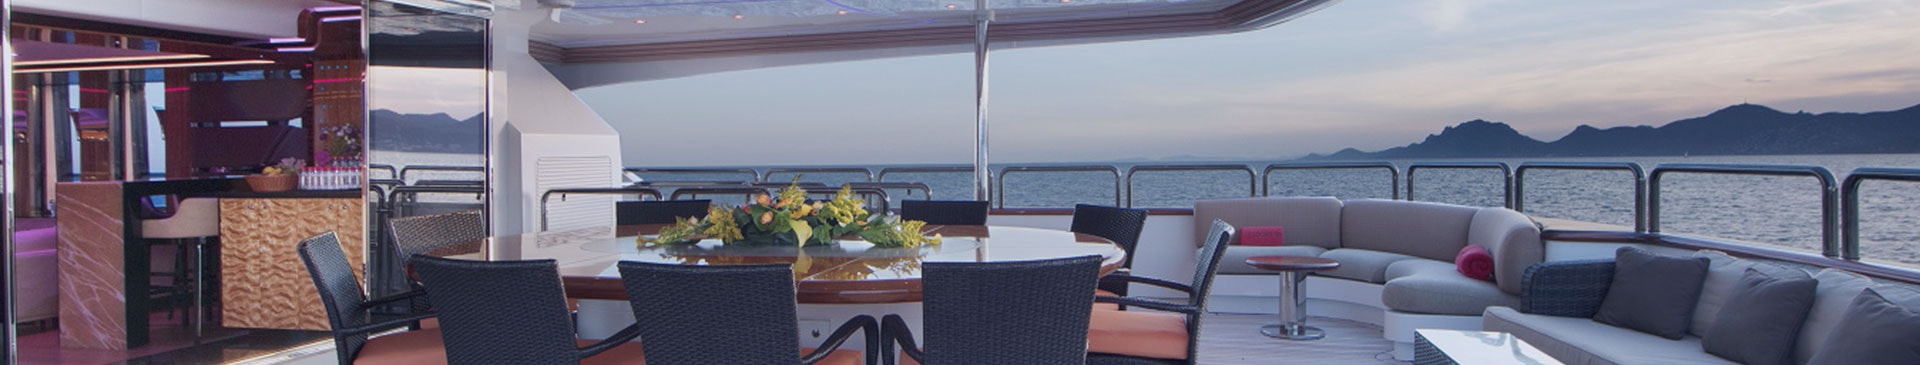 Book your corporate event on a luxury yacht